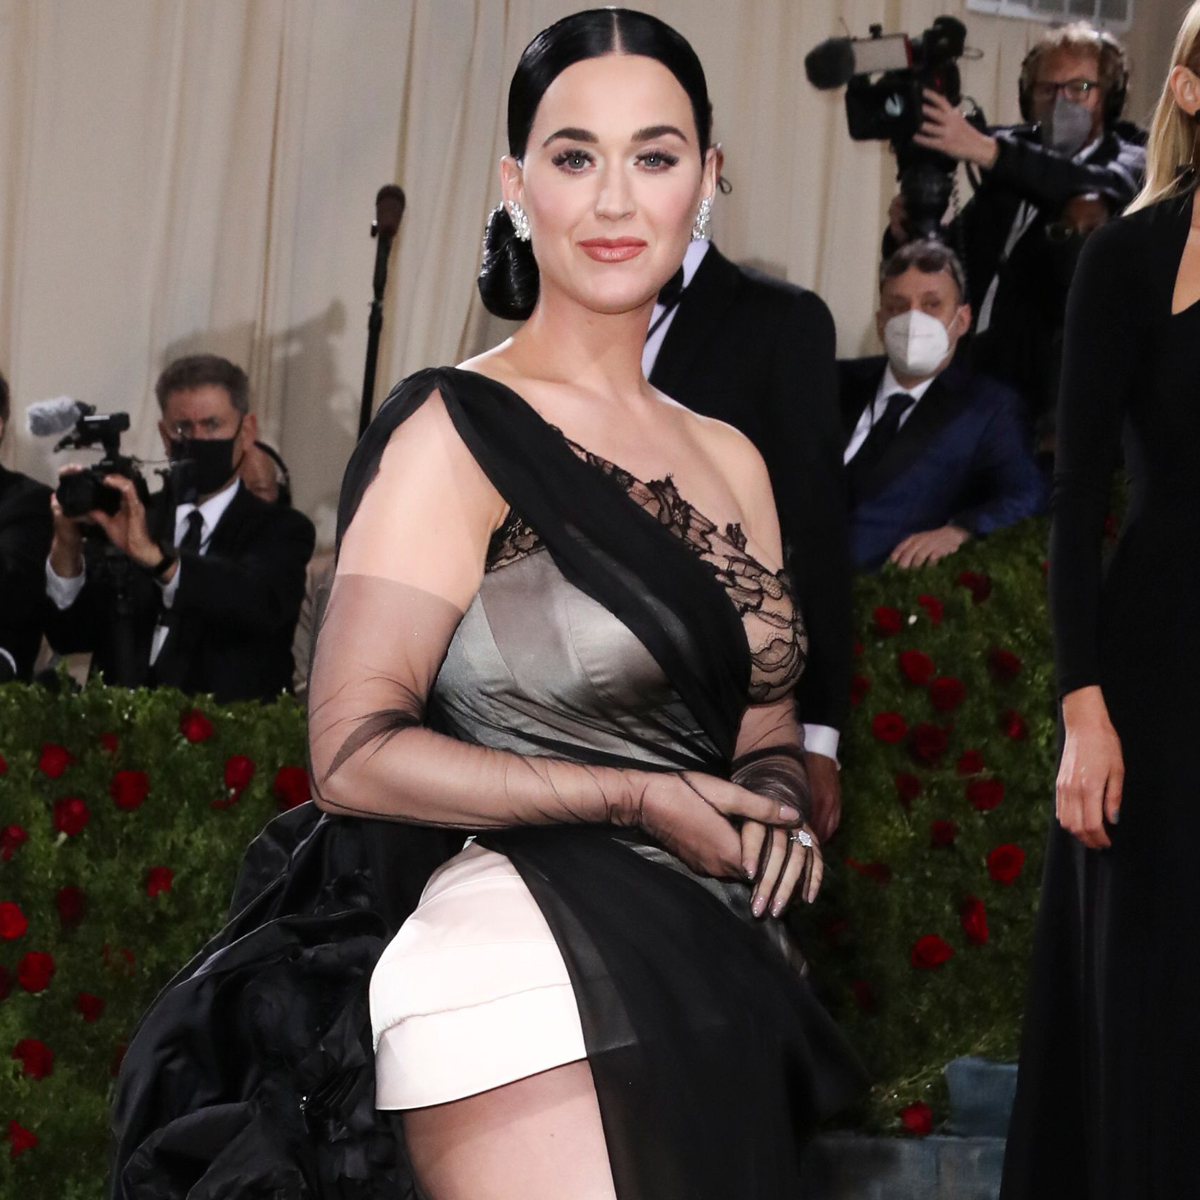 Katy Perry Says She Can't 'Go to the Restroom' in 2022 Met Gala Dress